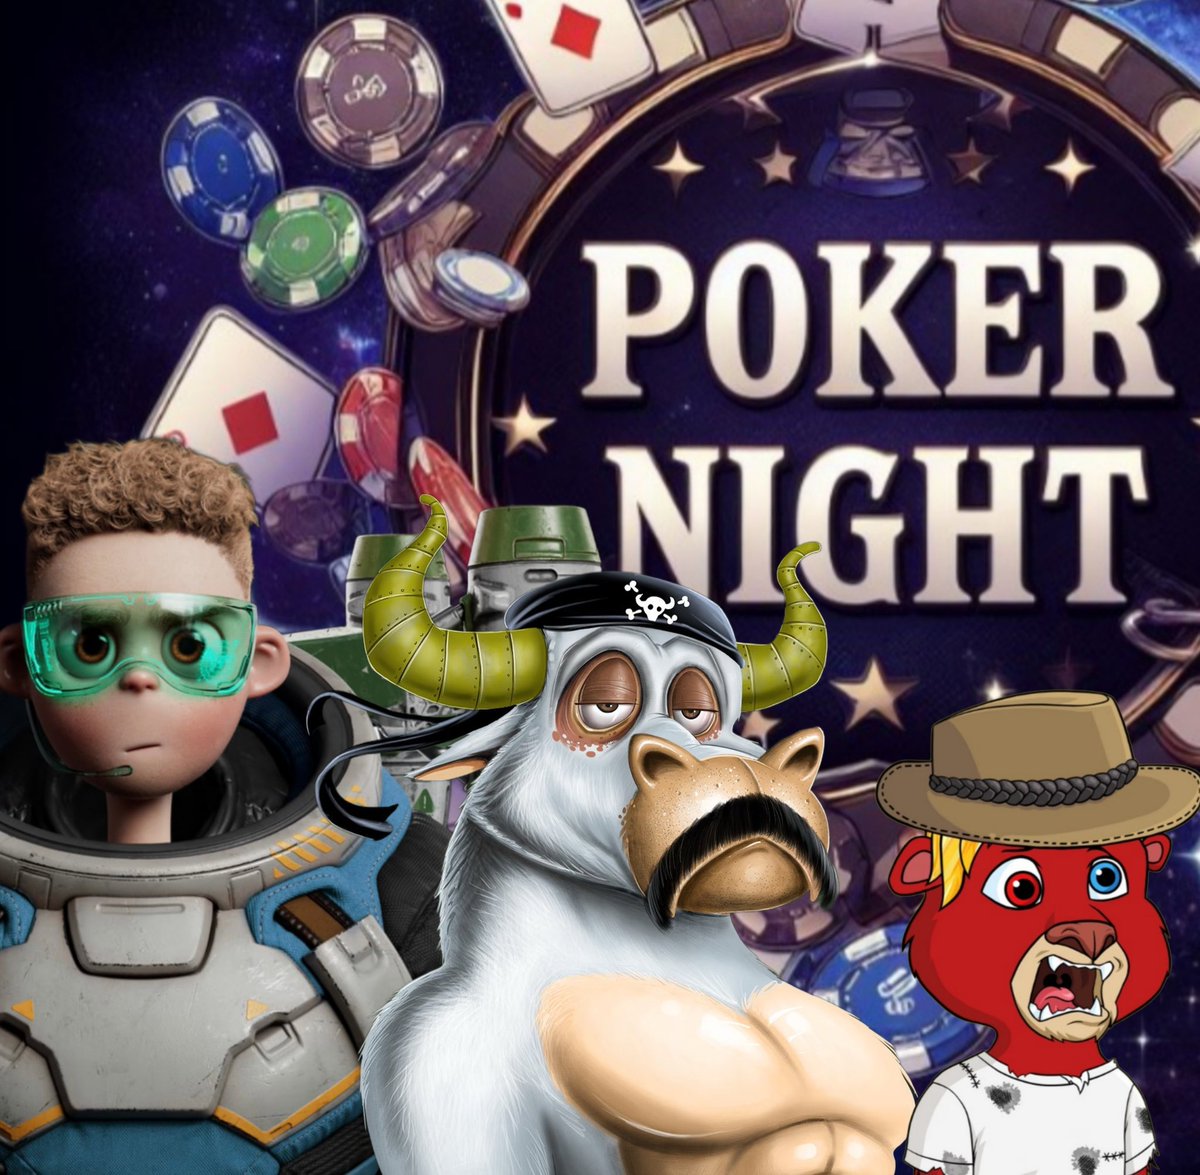 ✨✨#Passengers ✨✨ ♦️♣️Poker Night ♠️♥️ Join us this Sunday (29/10) 3pm EST For a chance to win some amazing prizes! @BullsOnTheBlock (evo) 1x @LazyLionsNFT (cub) 1x @Passenger (peacekeeper) 1x #TSD For your tournament details visit our discord and check out EVENTS. The…